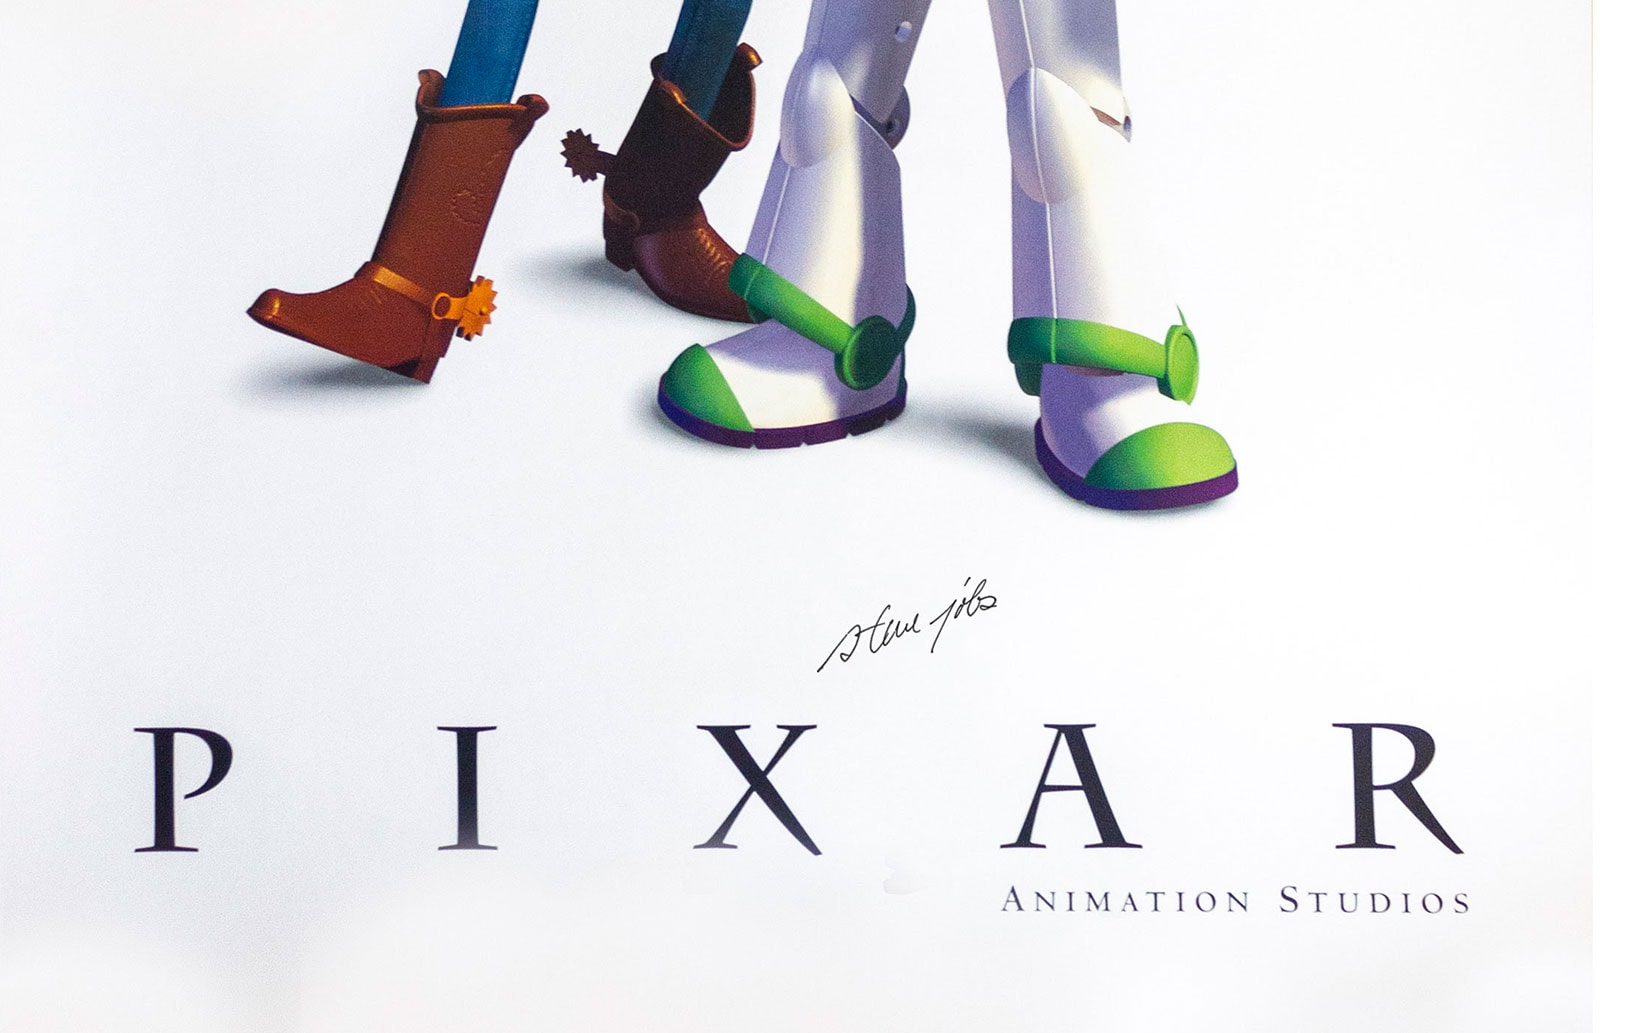 Pixar Toy Story poster signed by Steve Jobs